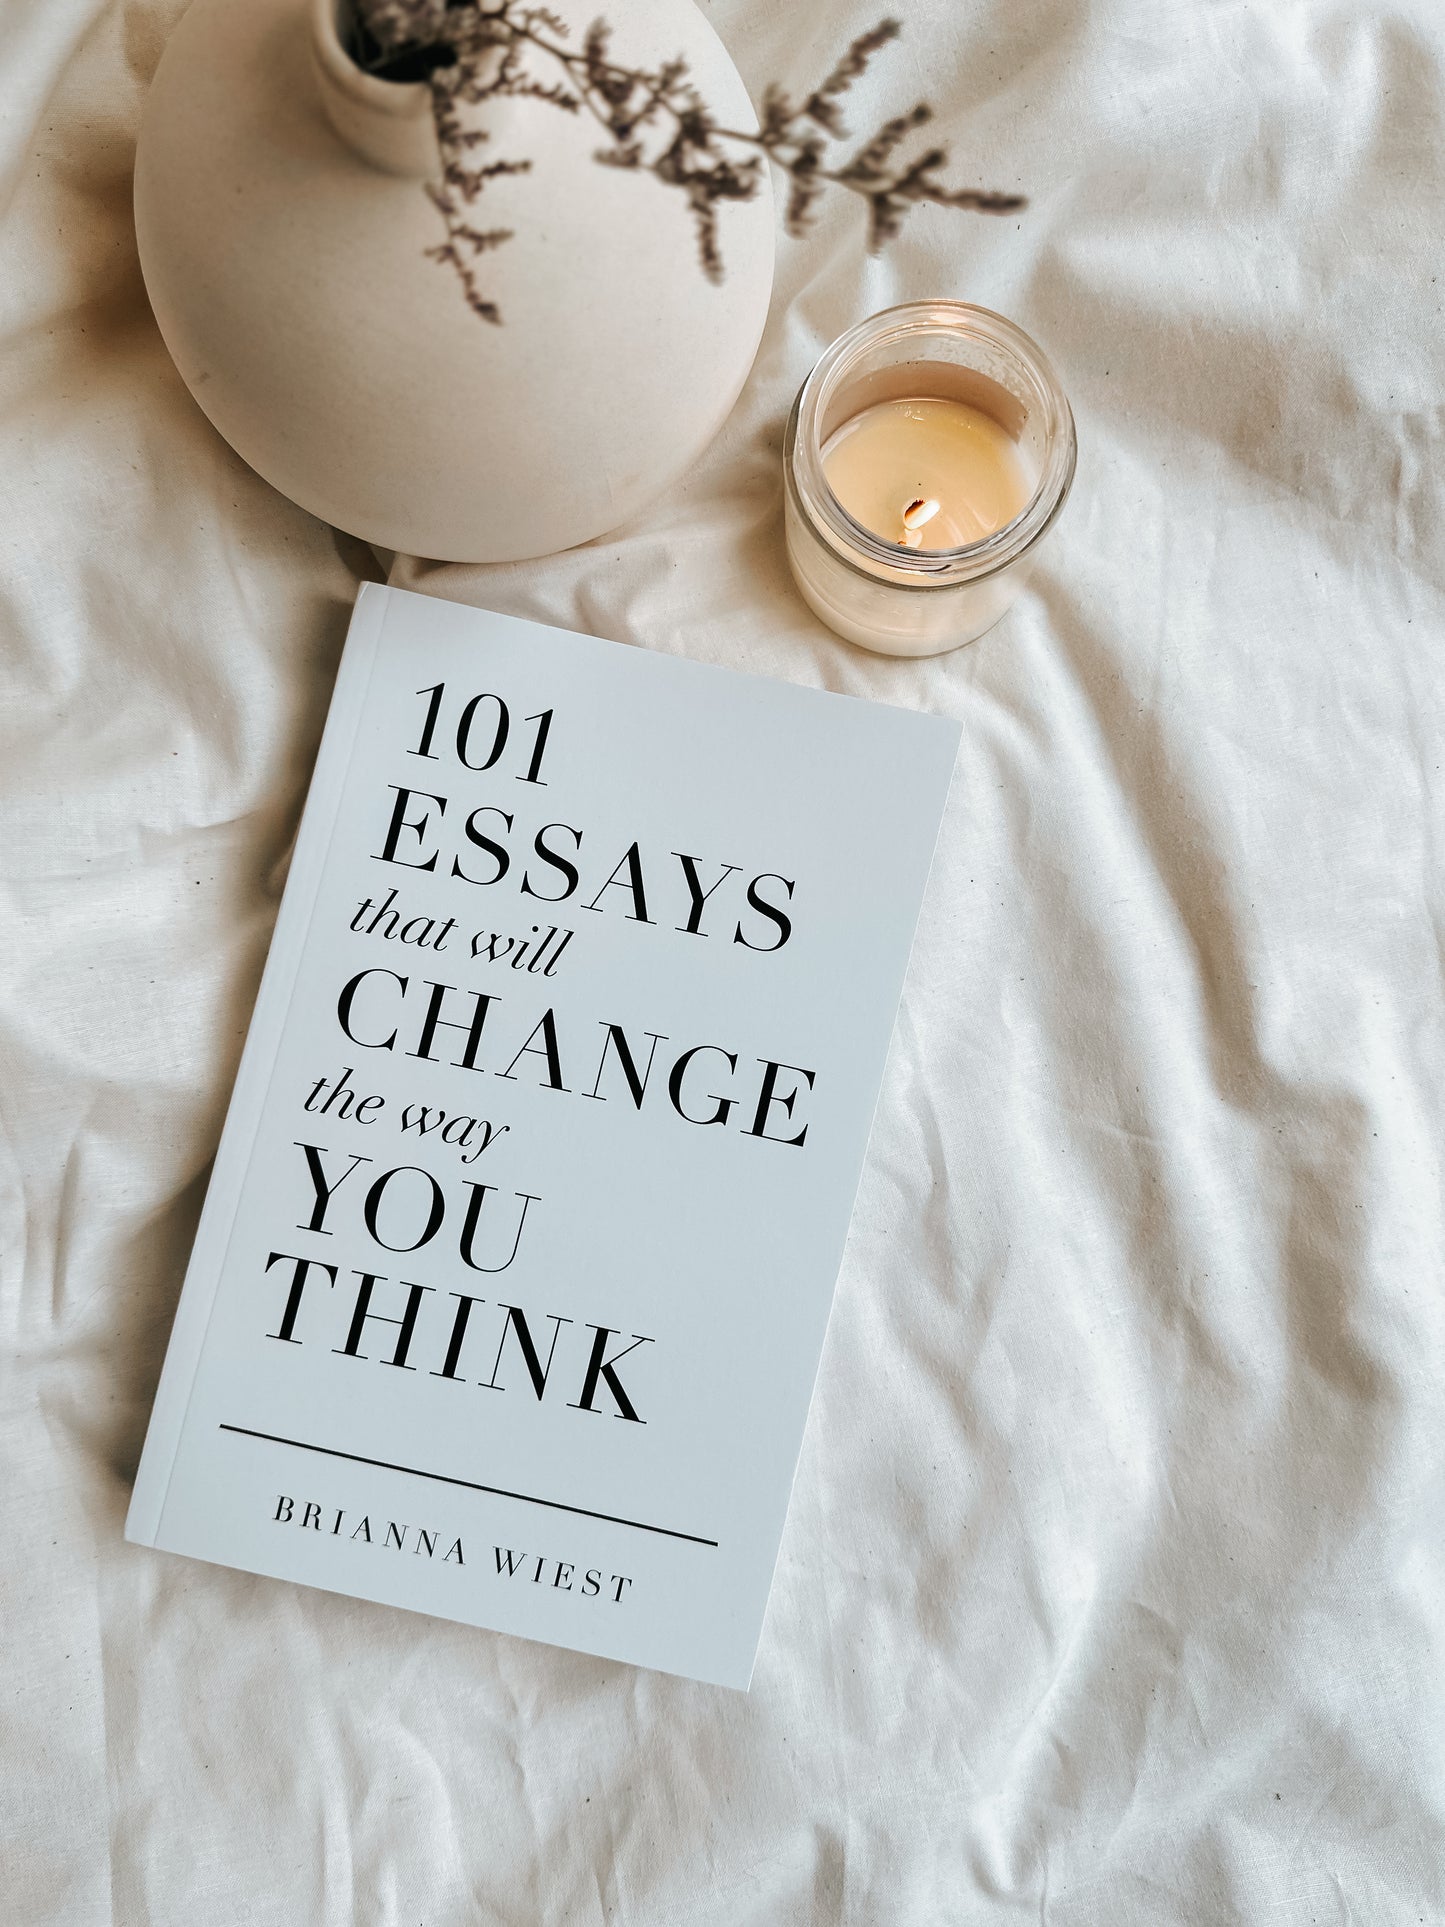 "101 essays that will change the way you think" // by Brianna Wiest